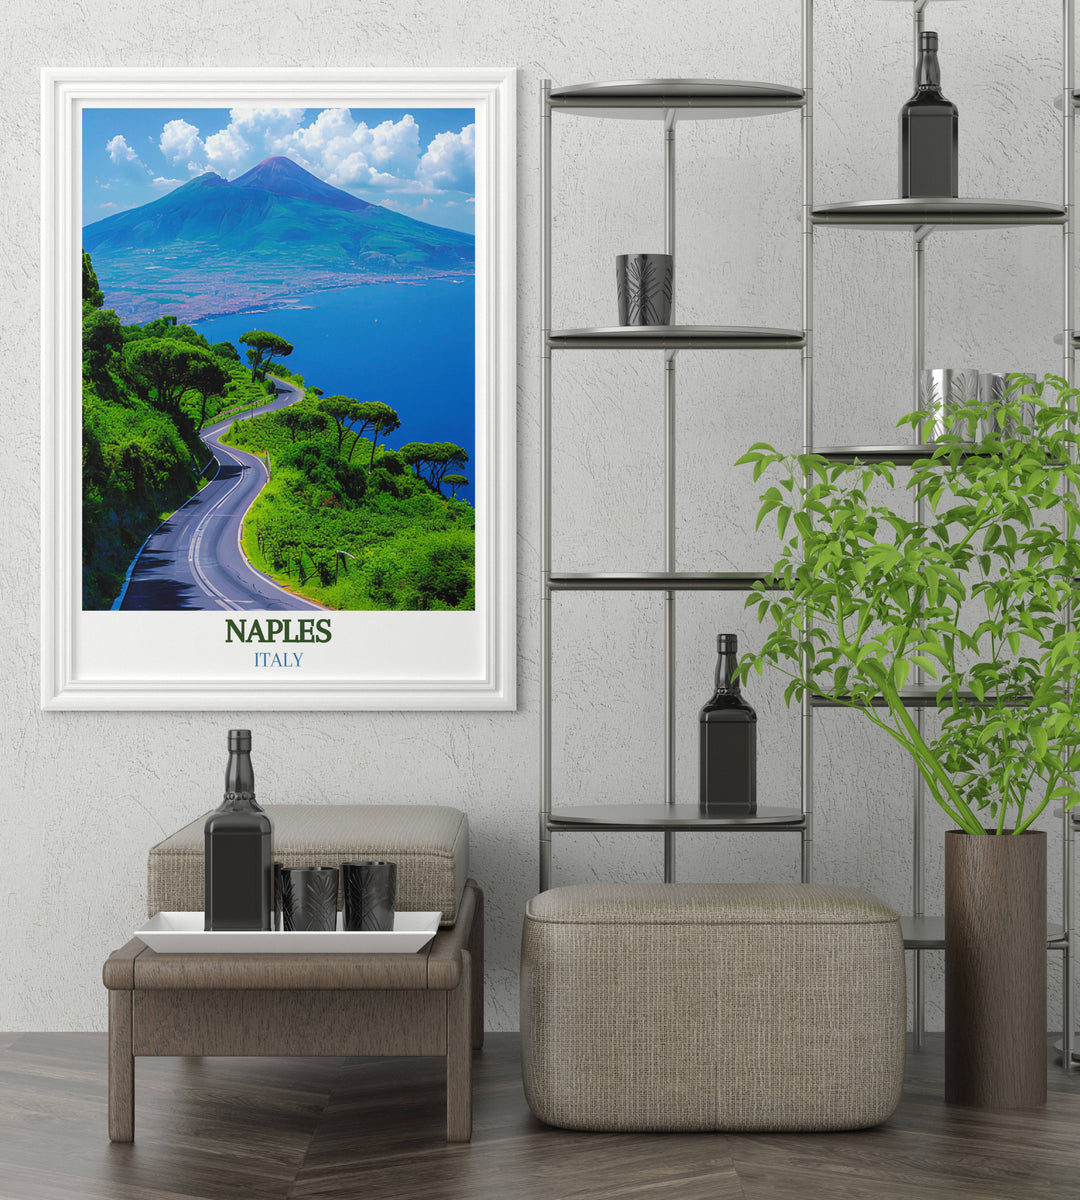 Colorful art print of Naples Florida displaying vibrant street scenes and cultural landmarks.